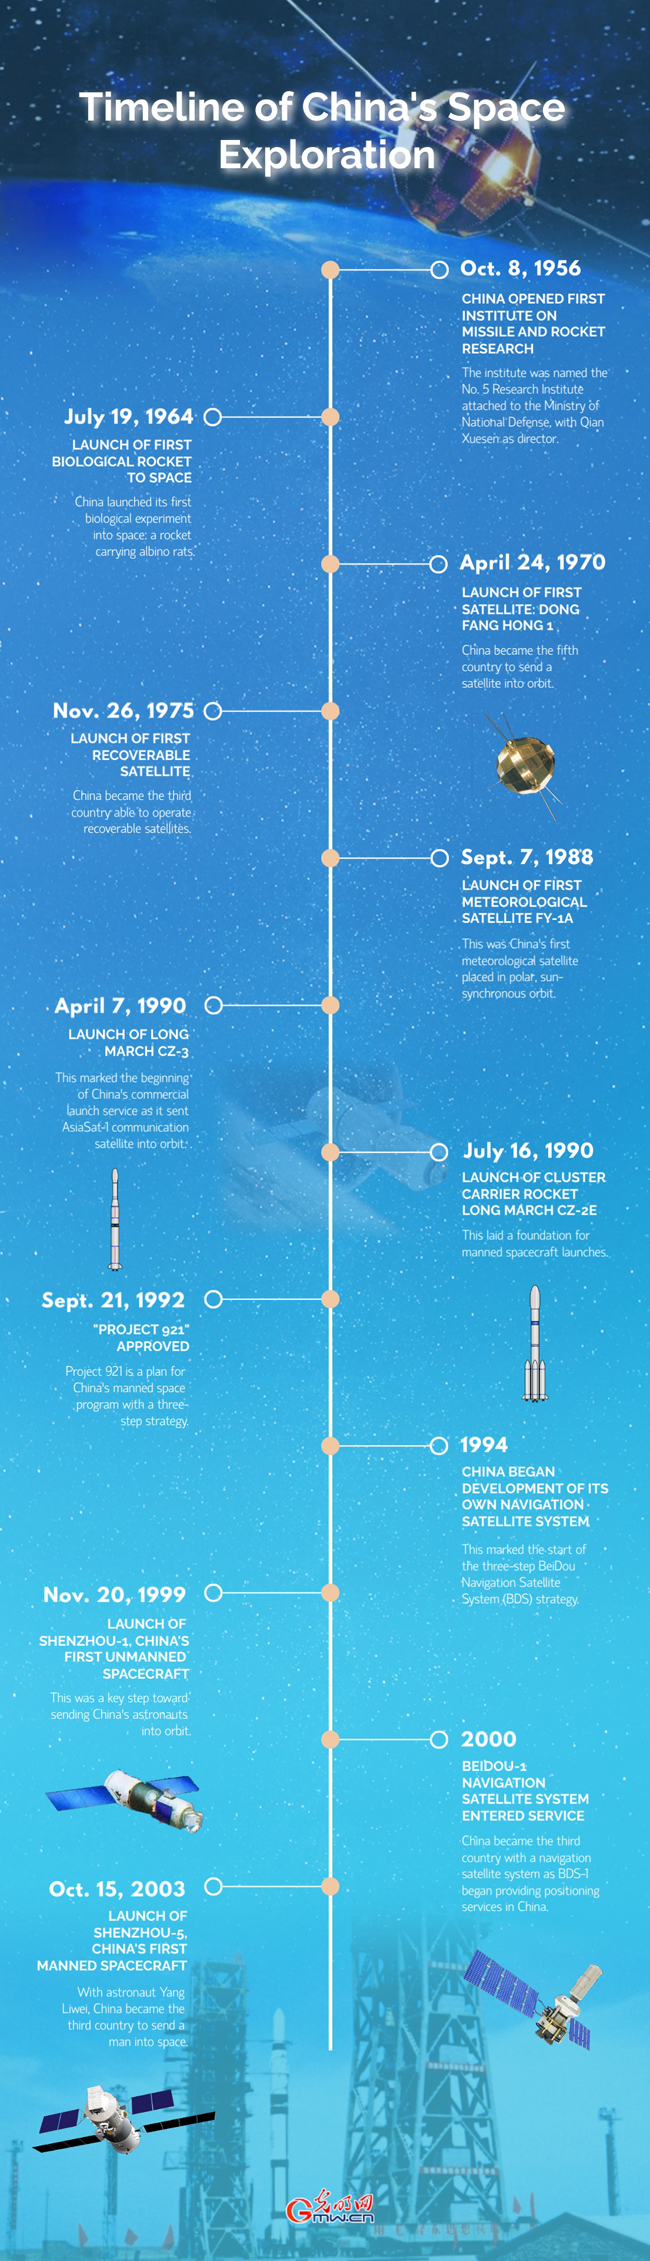 Timeline of China's Space Exploration